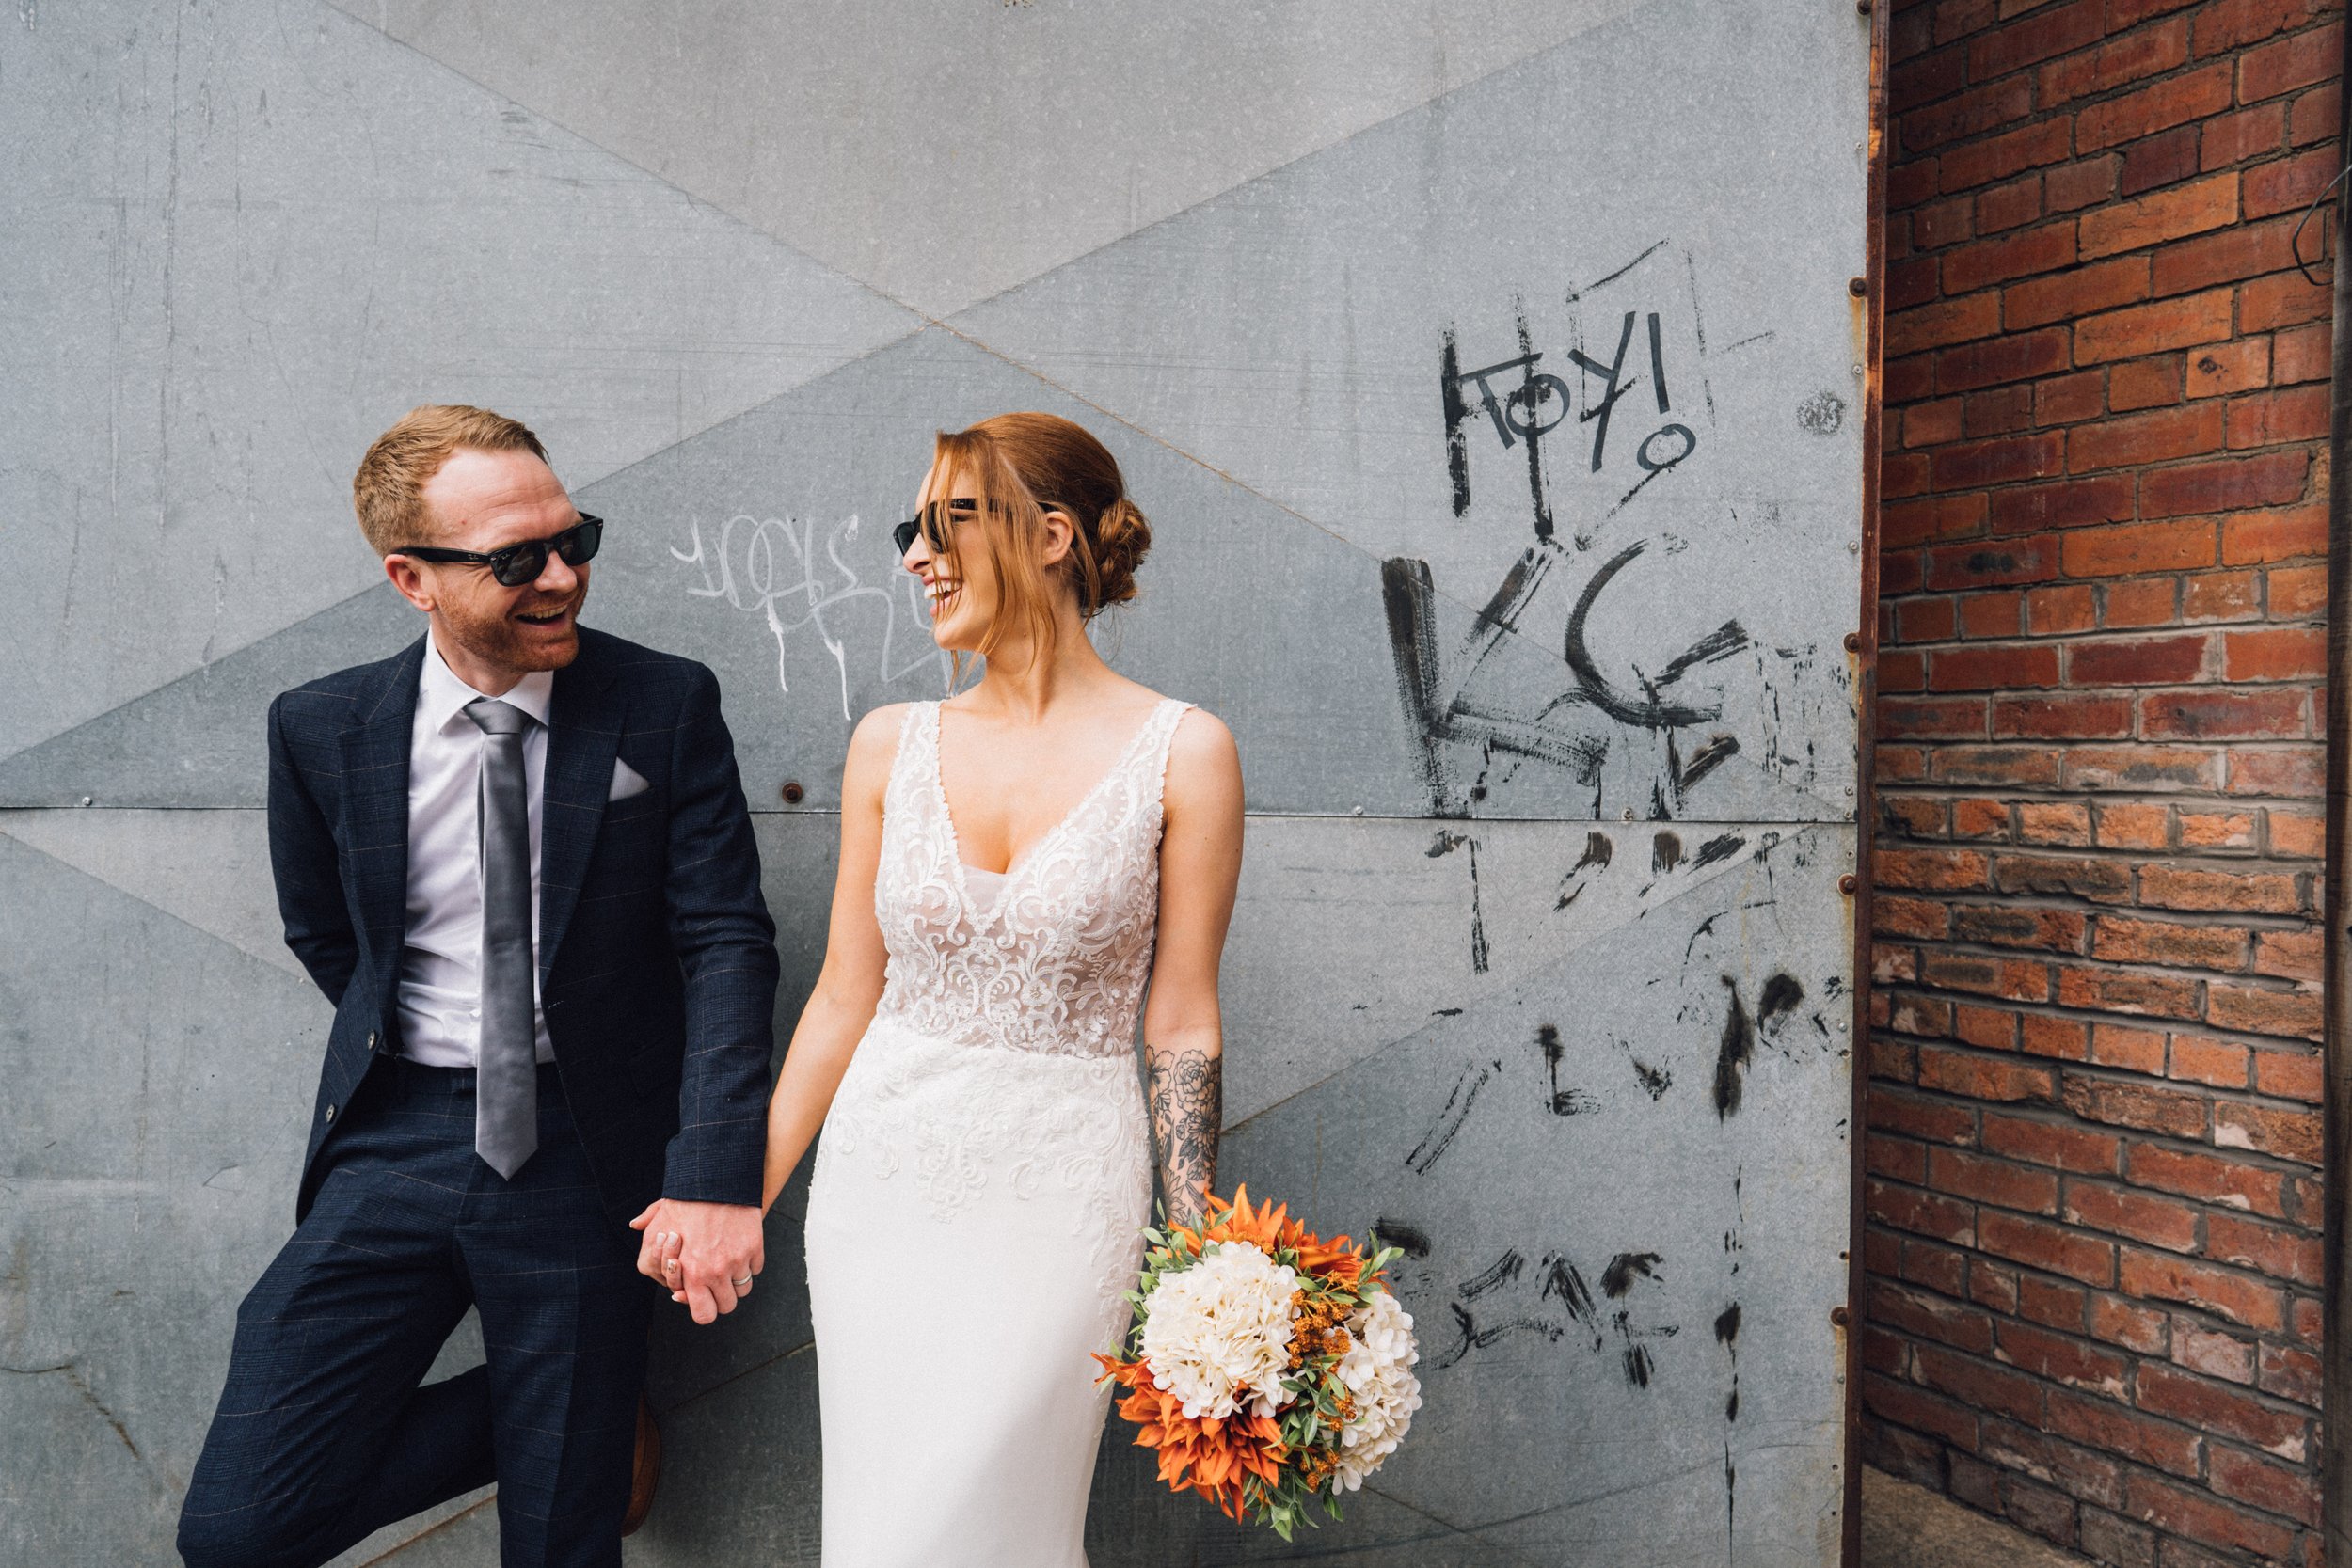  Photographer Credit: Alexandra Holt Photography  Bride and groom are stood outside in front of a grey concrete wall with black graffiti on it. They are holding hands looking at each other and laughing whilst both are wearing sunglasses. The groom is